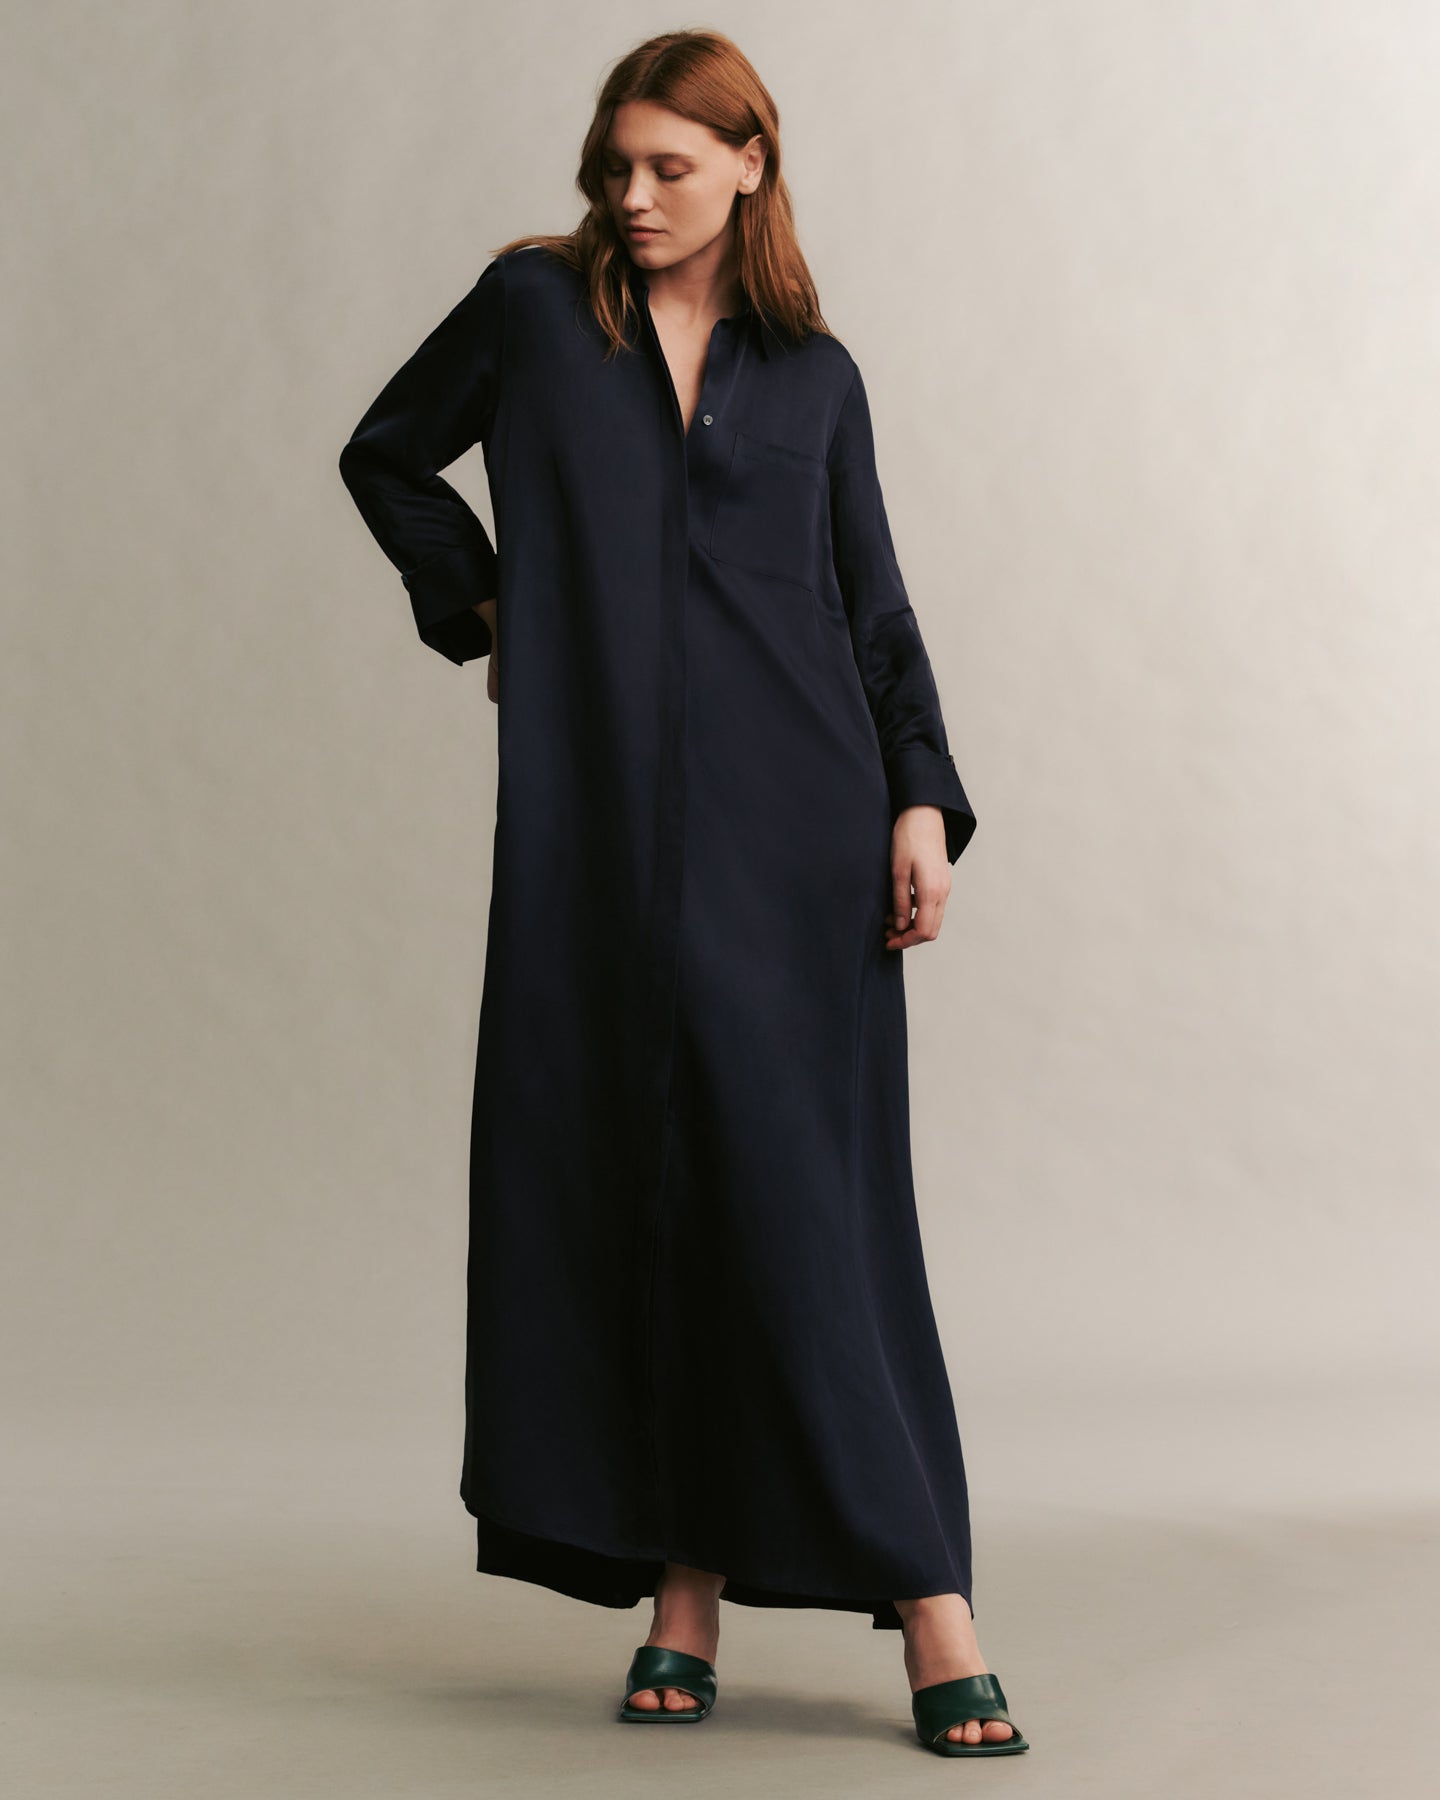 TWP Midnight Jenny's Gown in coated viscose linen view 1